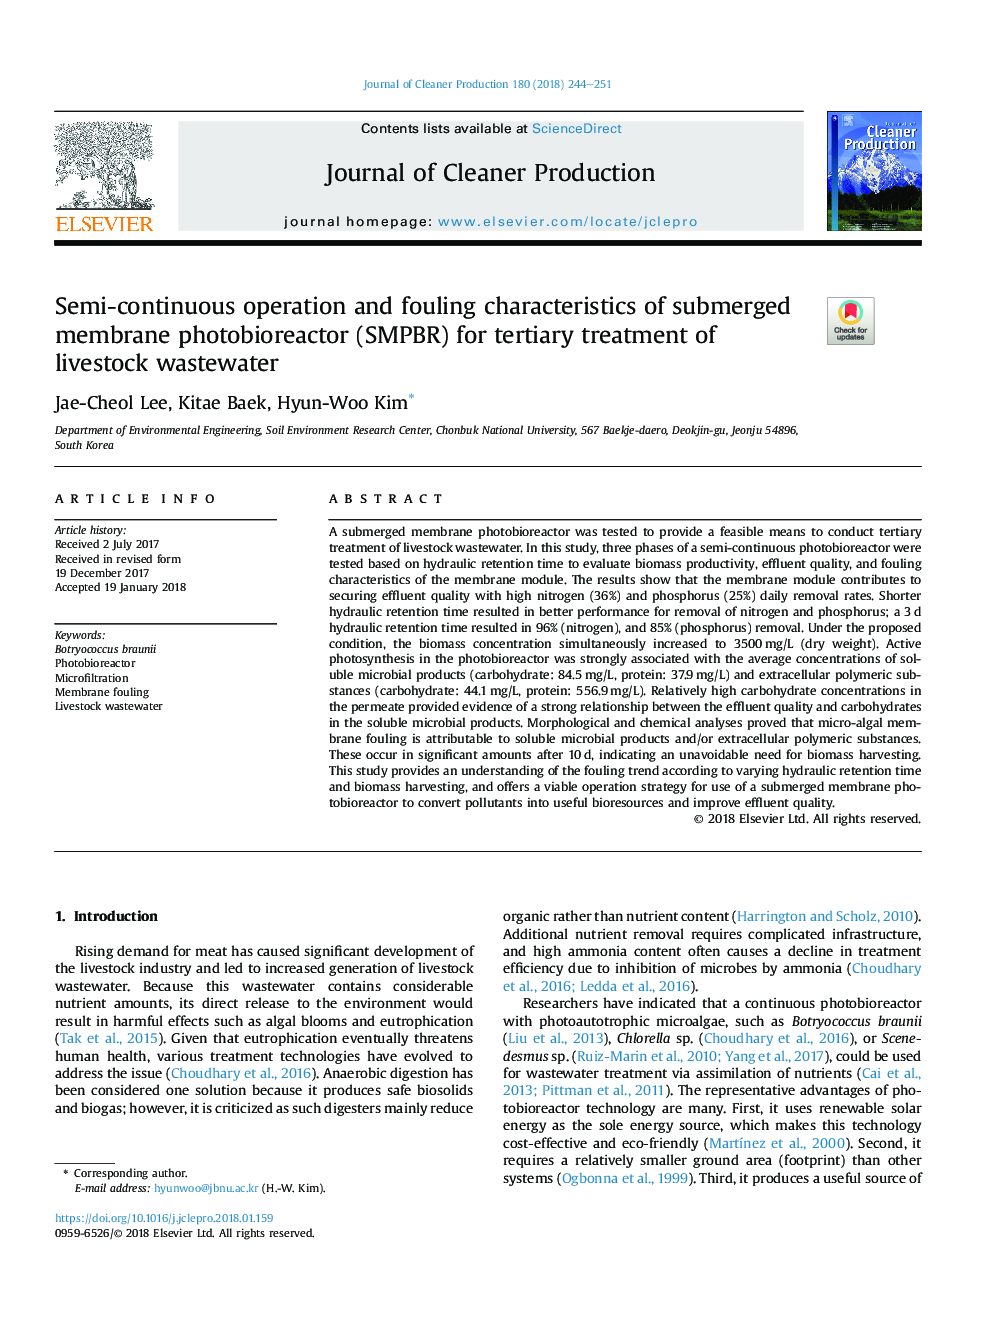 Semi-continuous operation and fouling characteristics of submerged membrane photobioreactor (SMPBR) for tertiary treatment of livestock wastewater